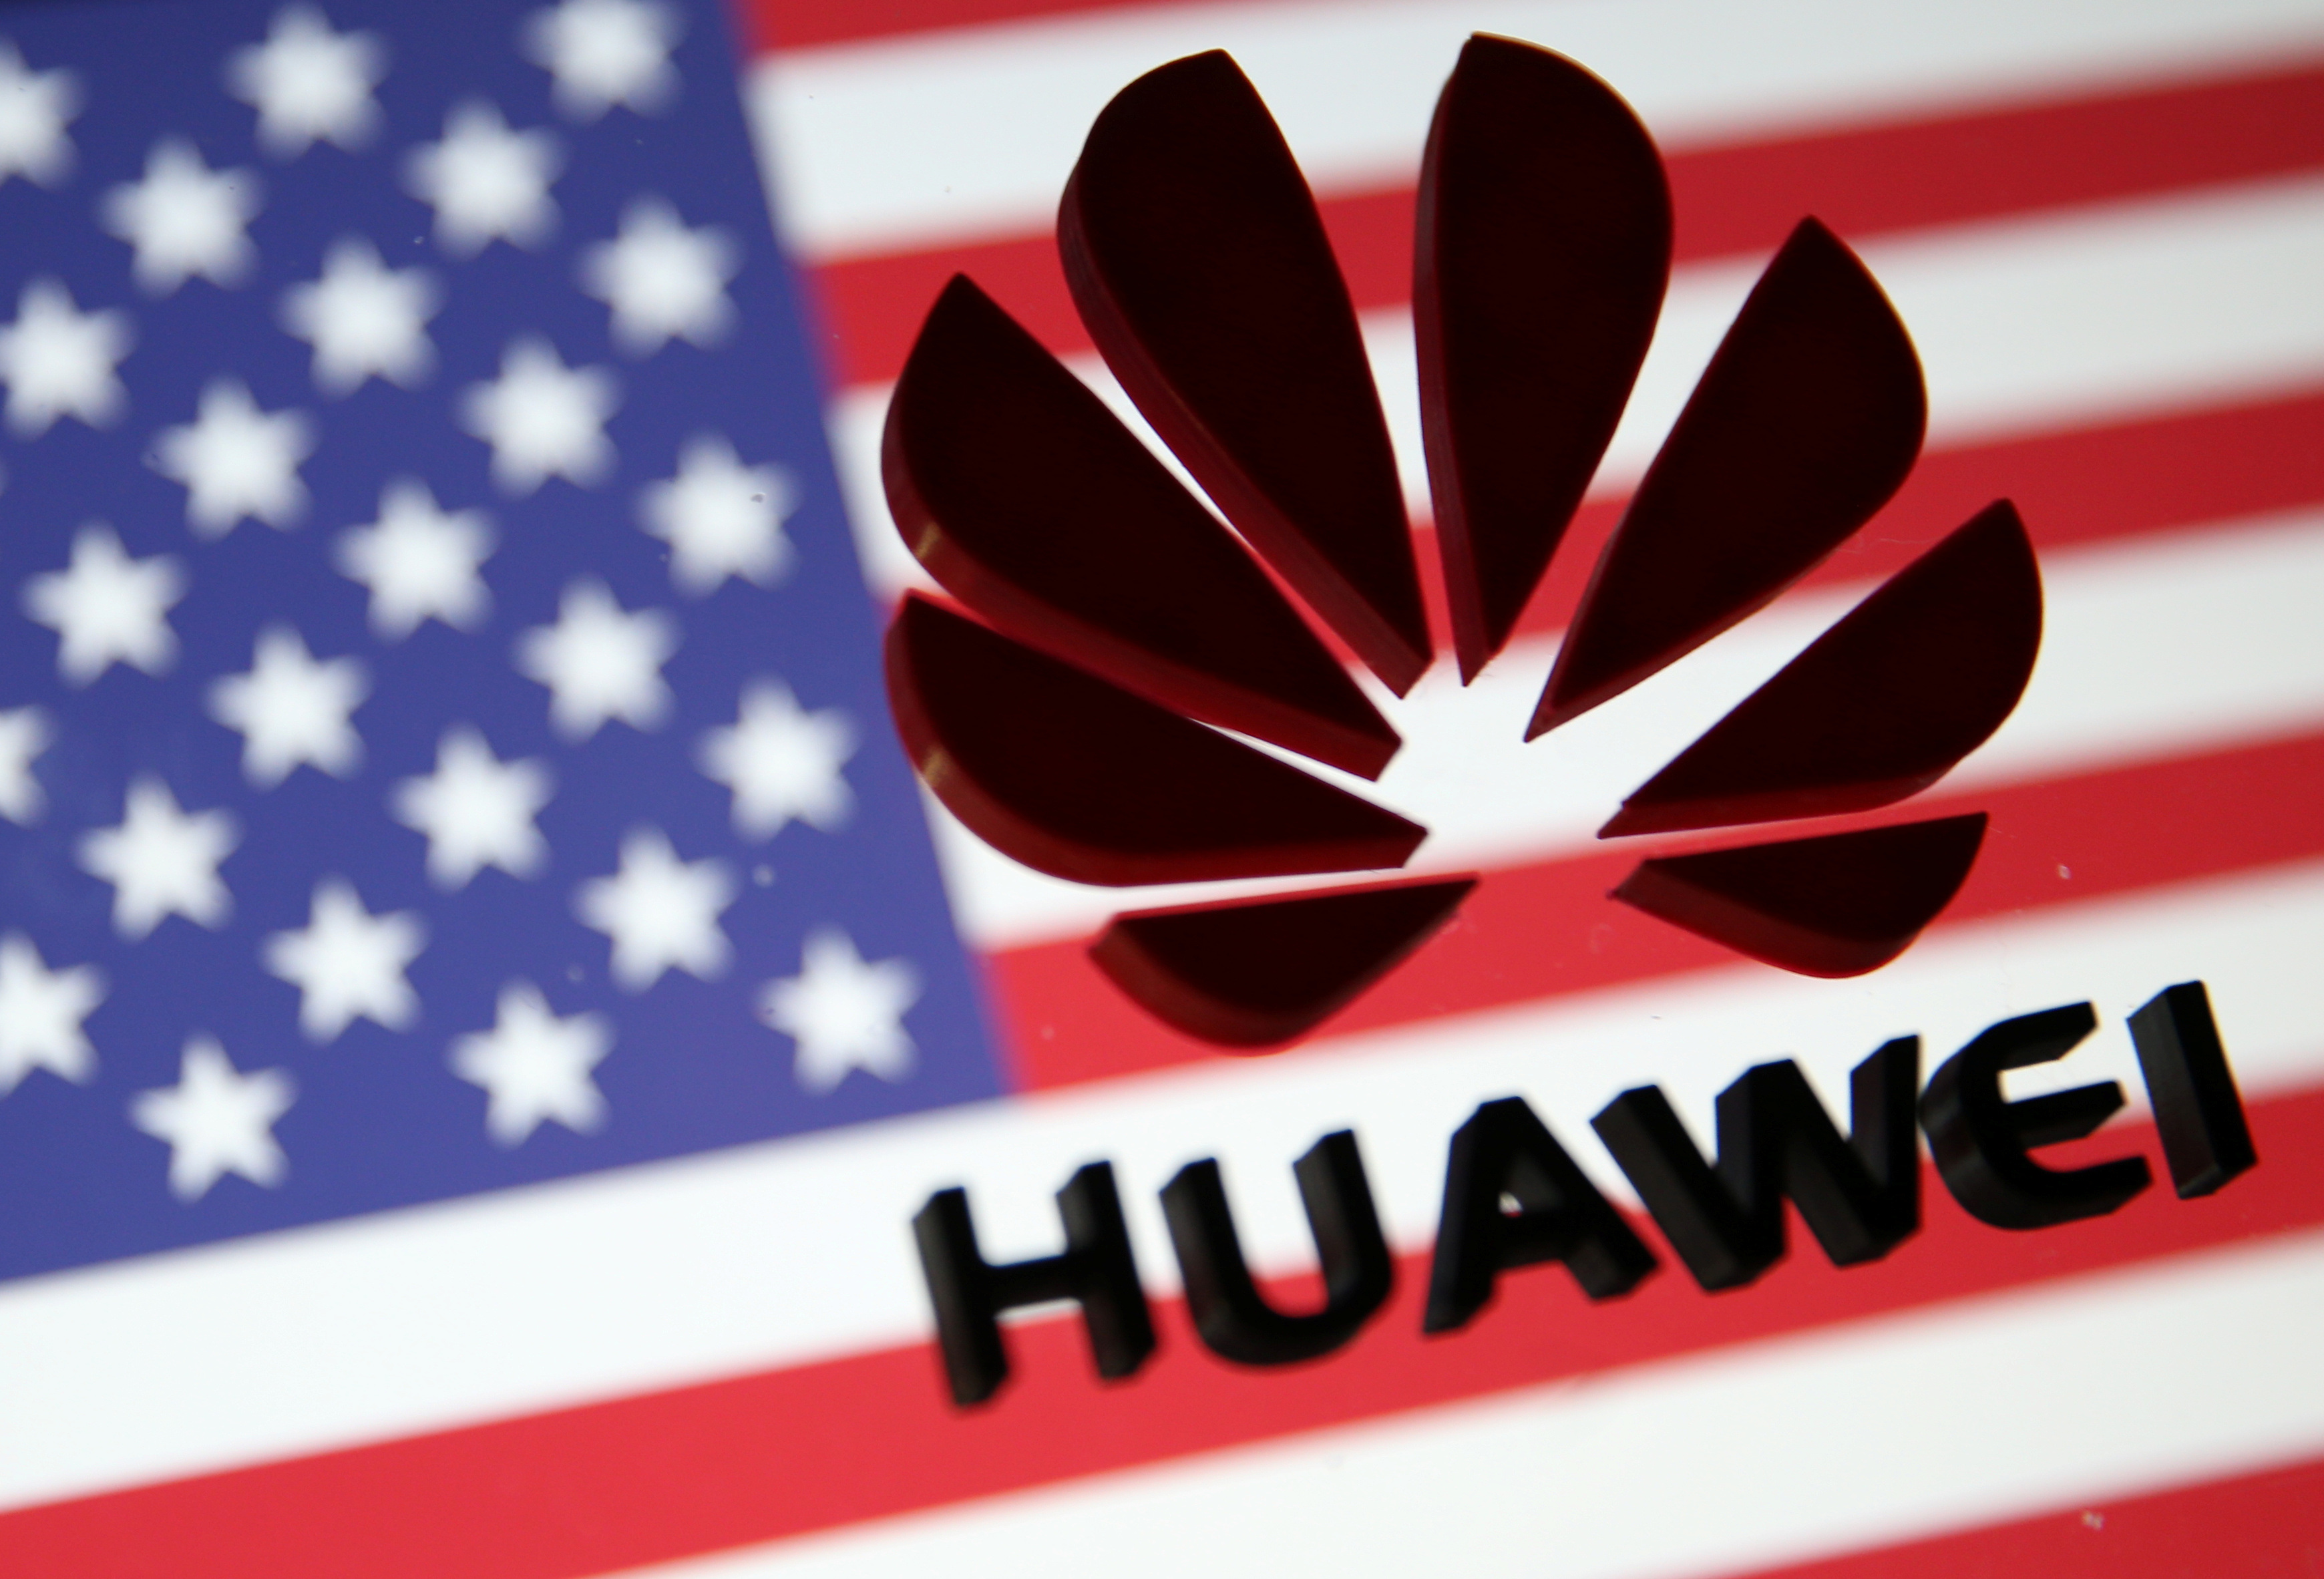 A 3D printed Huawei logo is placed on glass above displayed US flag in this illustration